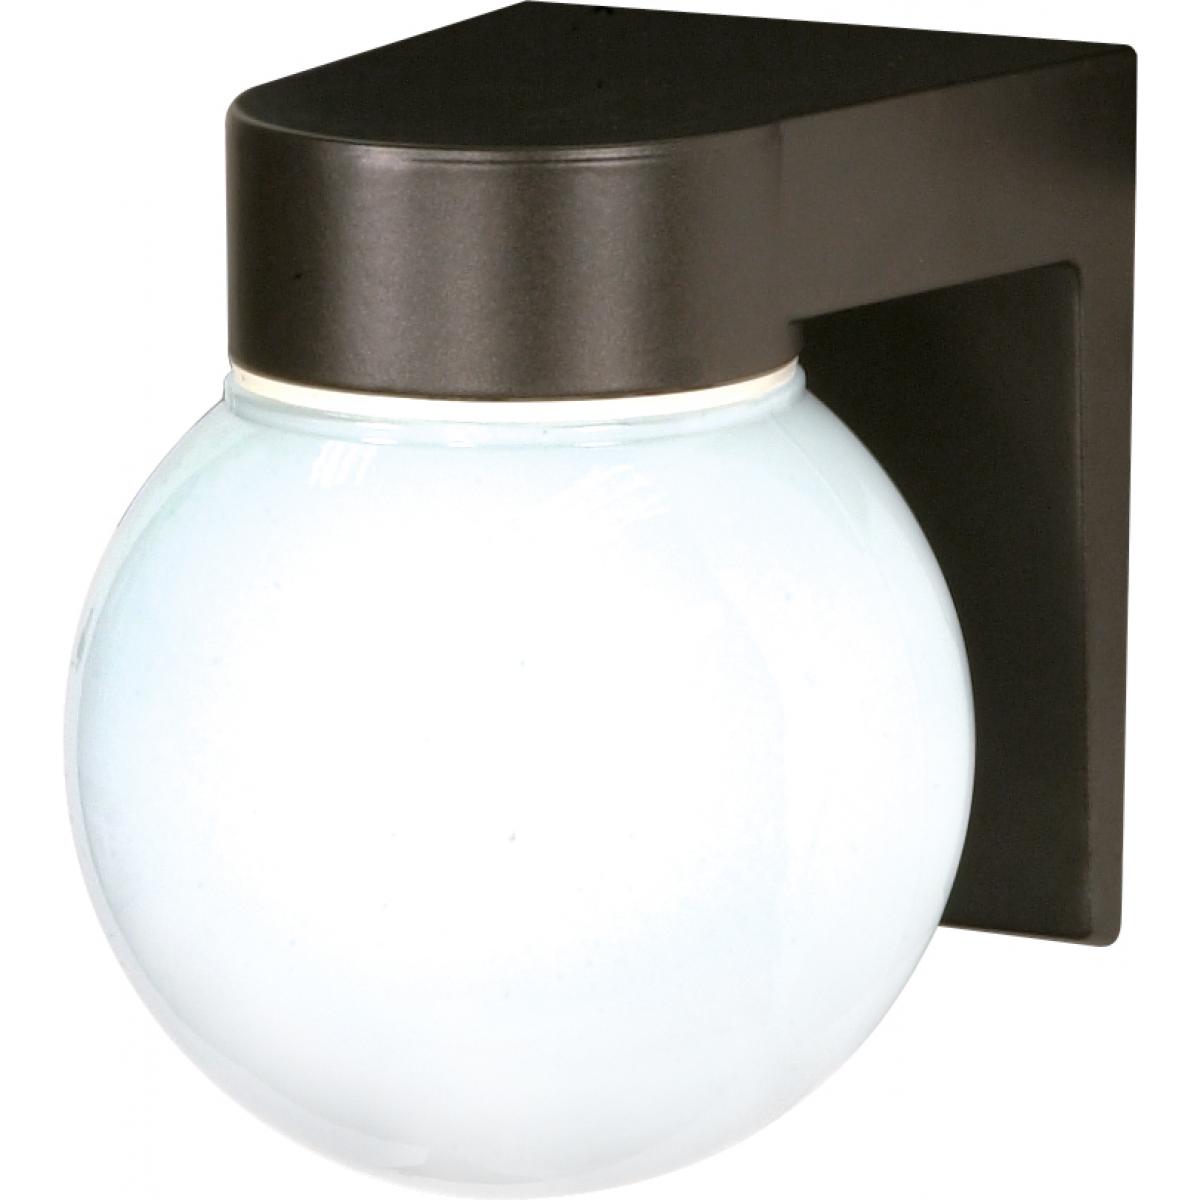 Satco 77-141 1 Light - 8" - Utility Wall Mount - With White Glass Globe - Bronzotic Finish